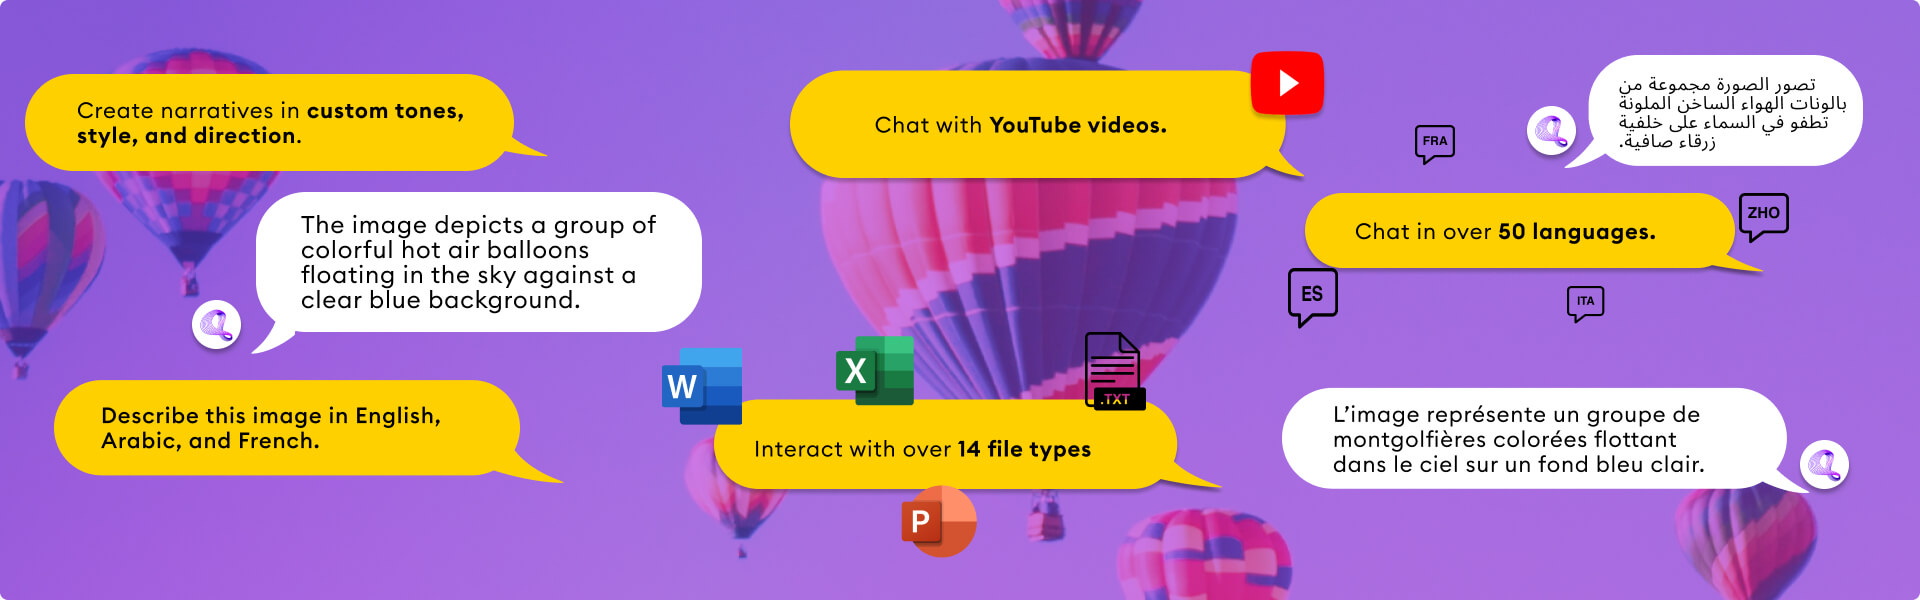 ImageChat-3 New Release Features